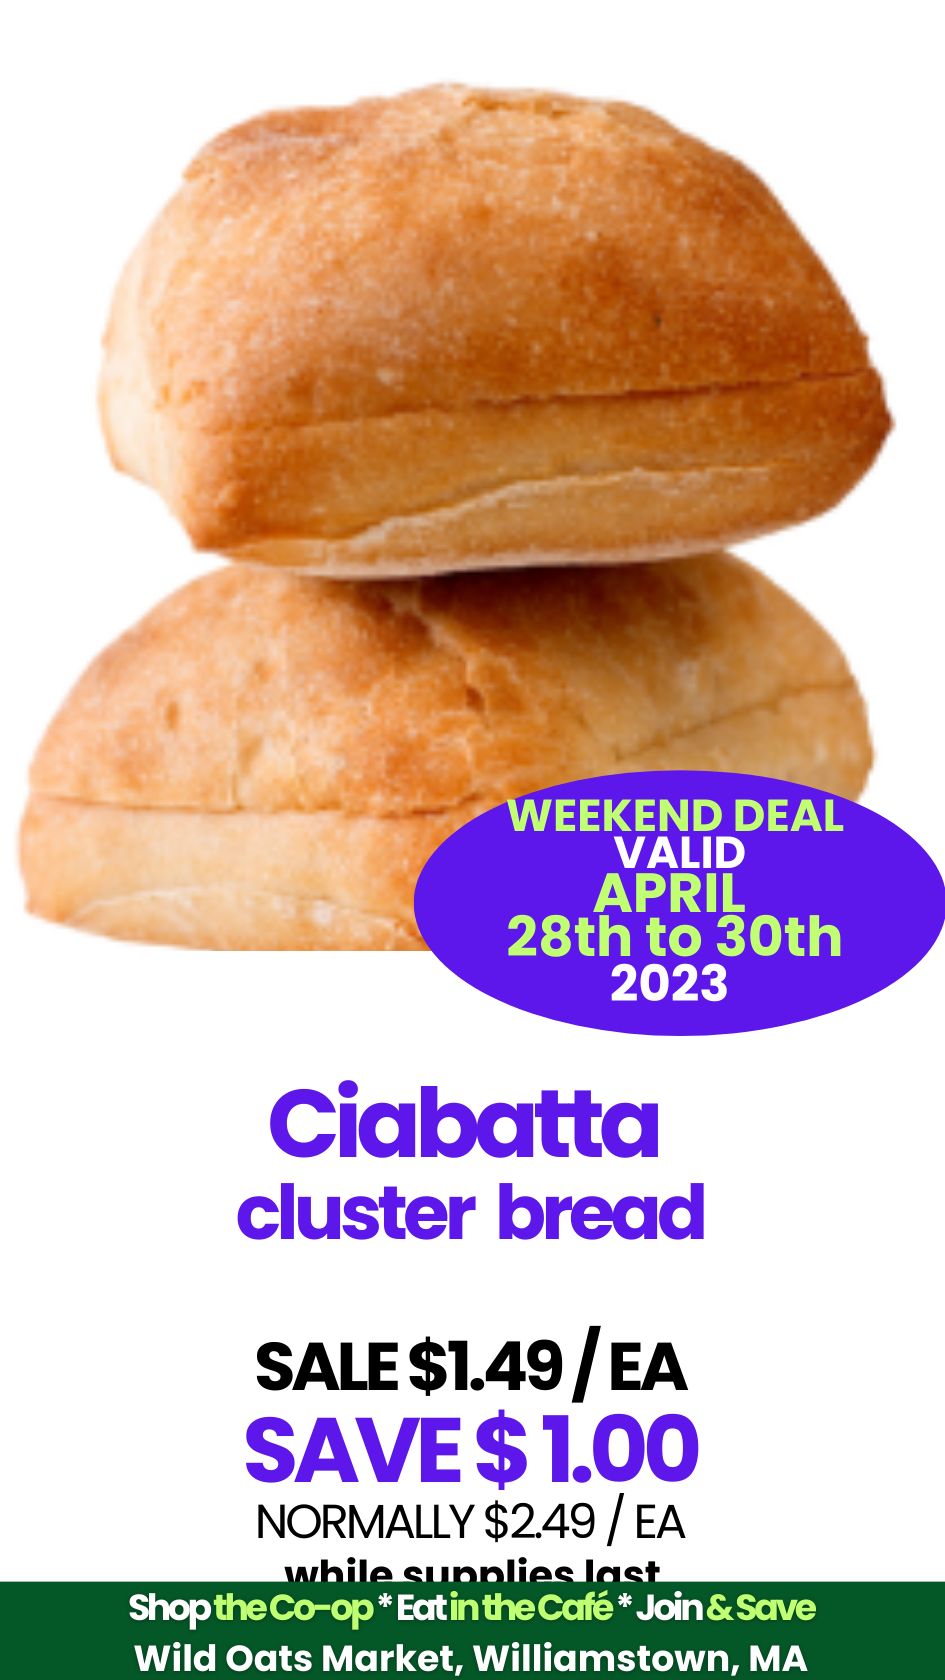 Wild Oats Market Weekly Update APR 28 to MAY CIABATTA CLUSTER BREAD.png